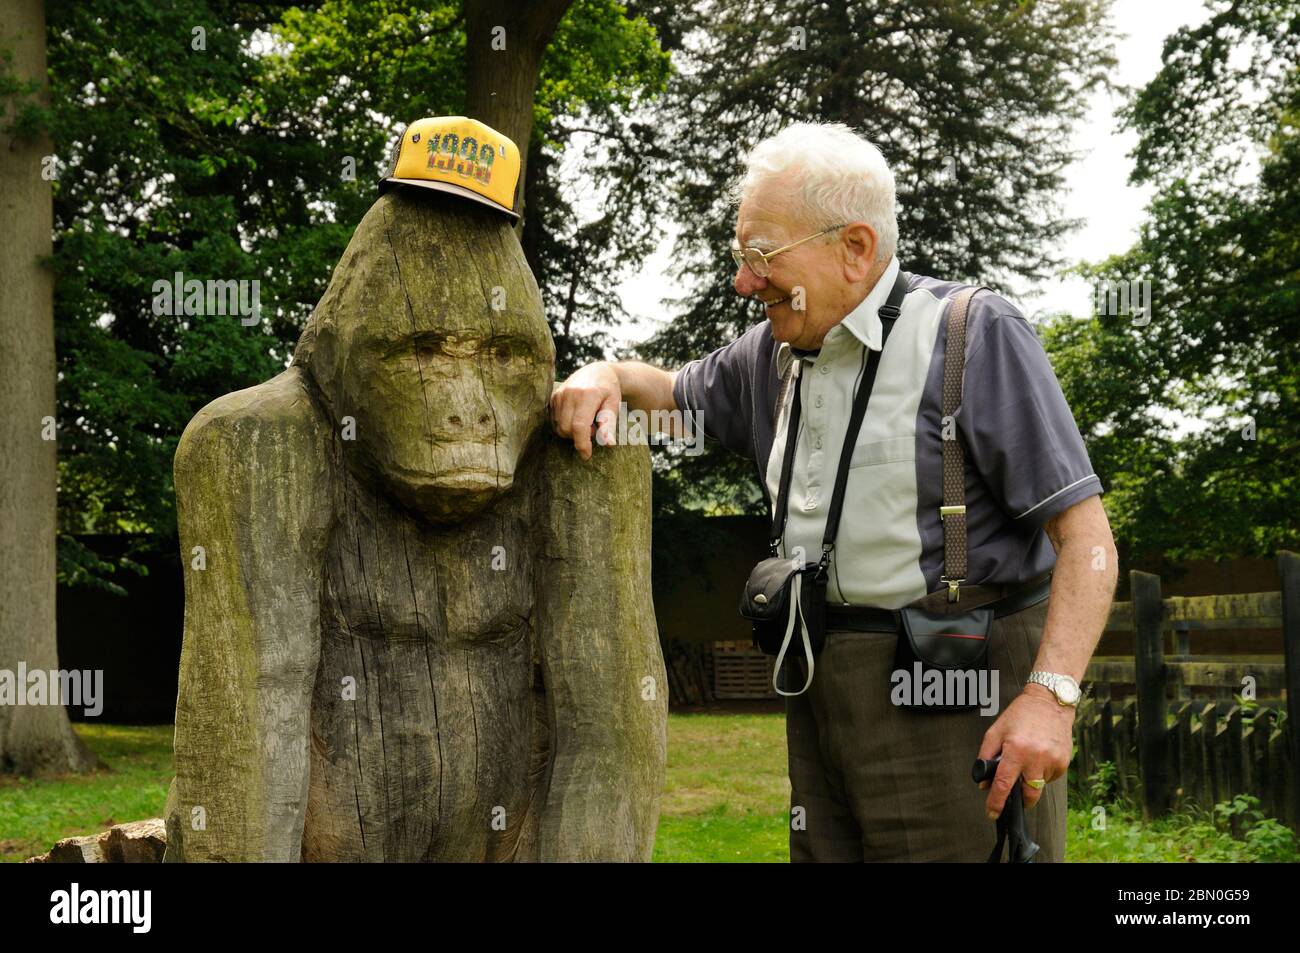 Elderly man having fun with his baseball cap and a carved wooden gorilla at the Elsham Hall country park, Lincolnshire, England Stock Photo